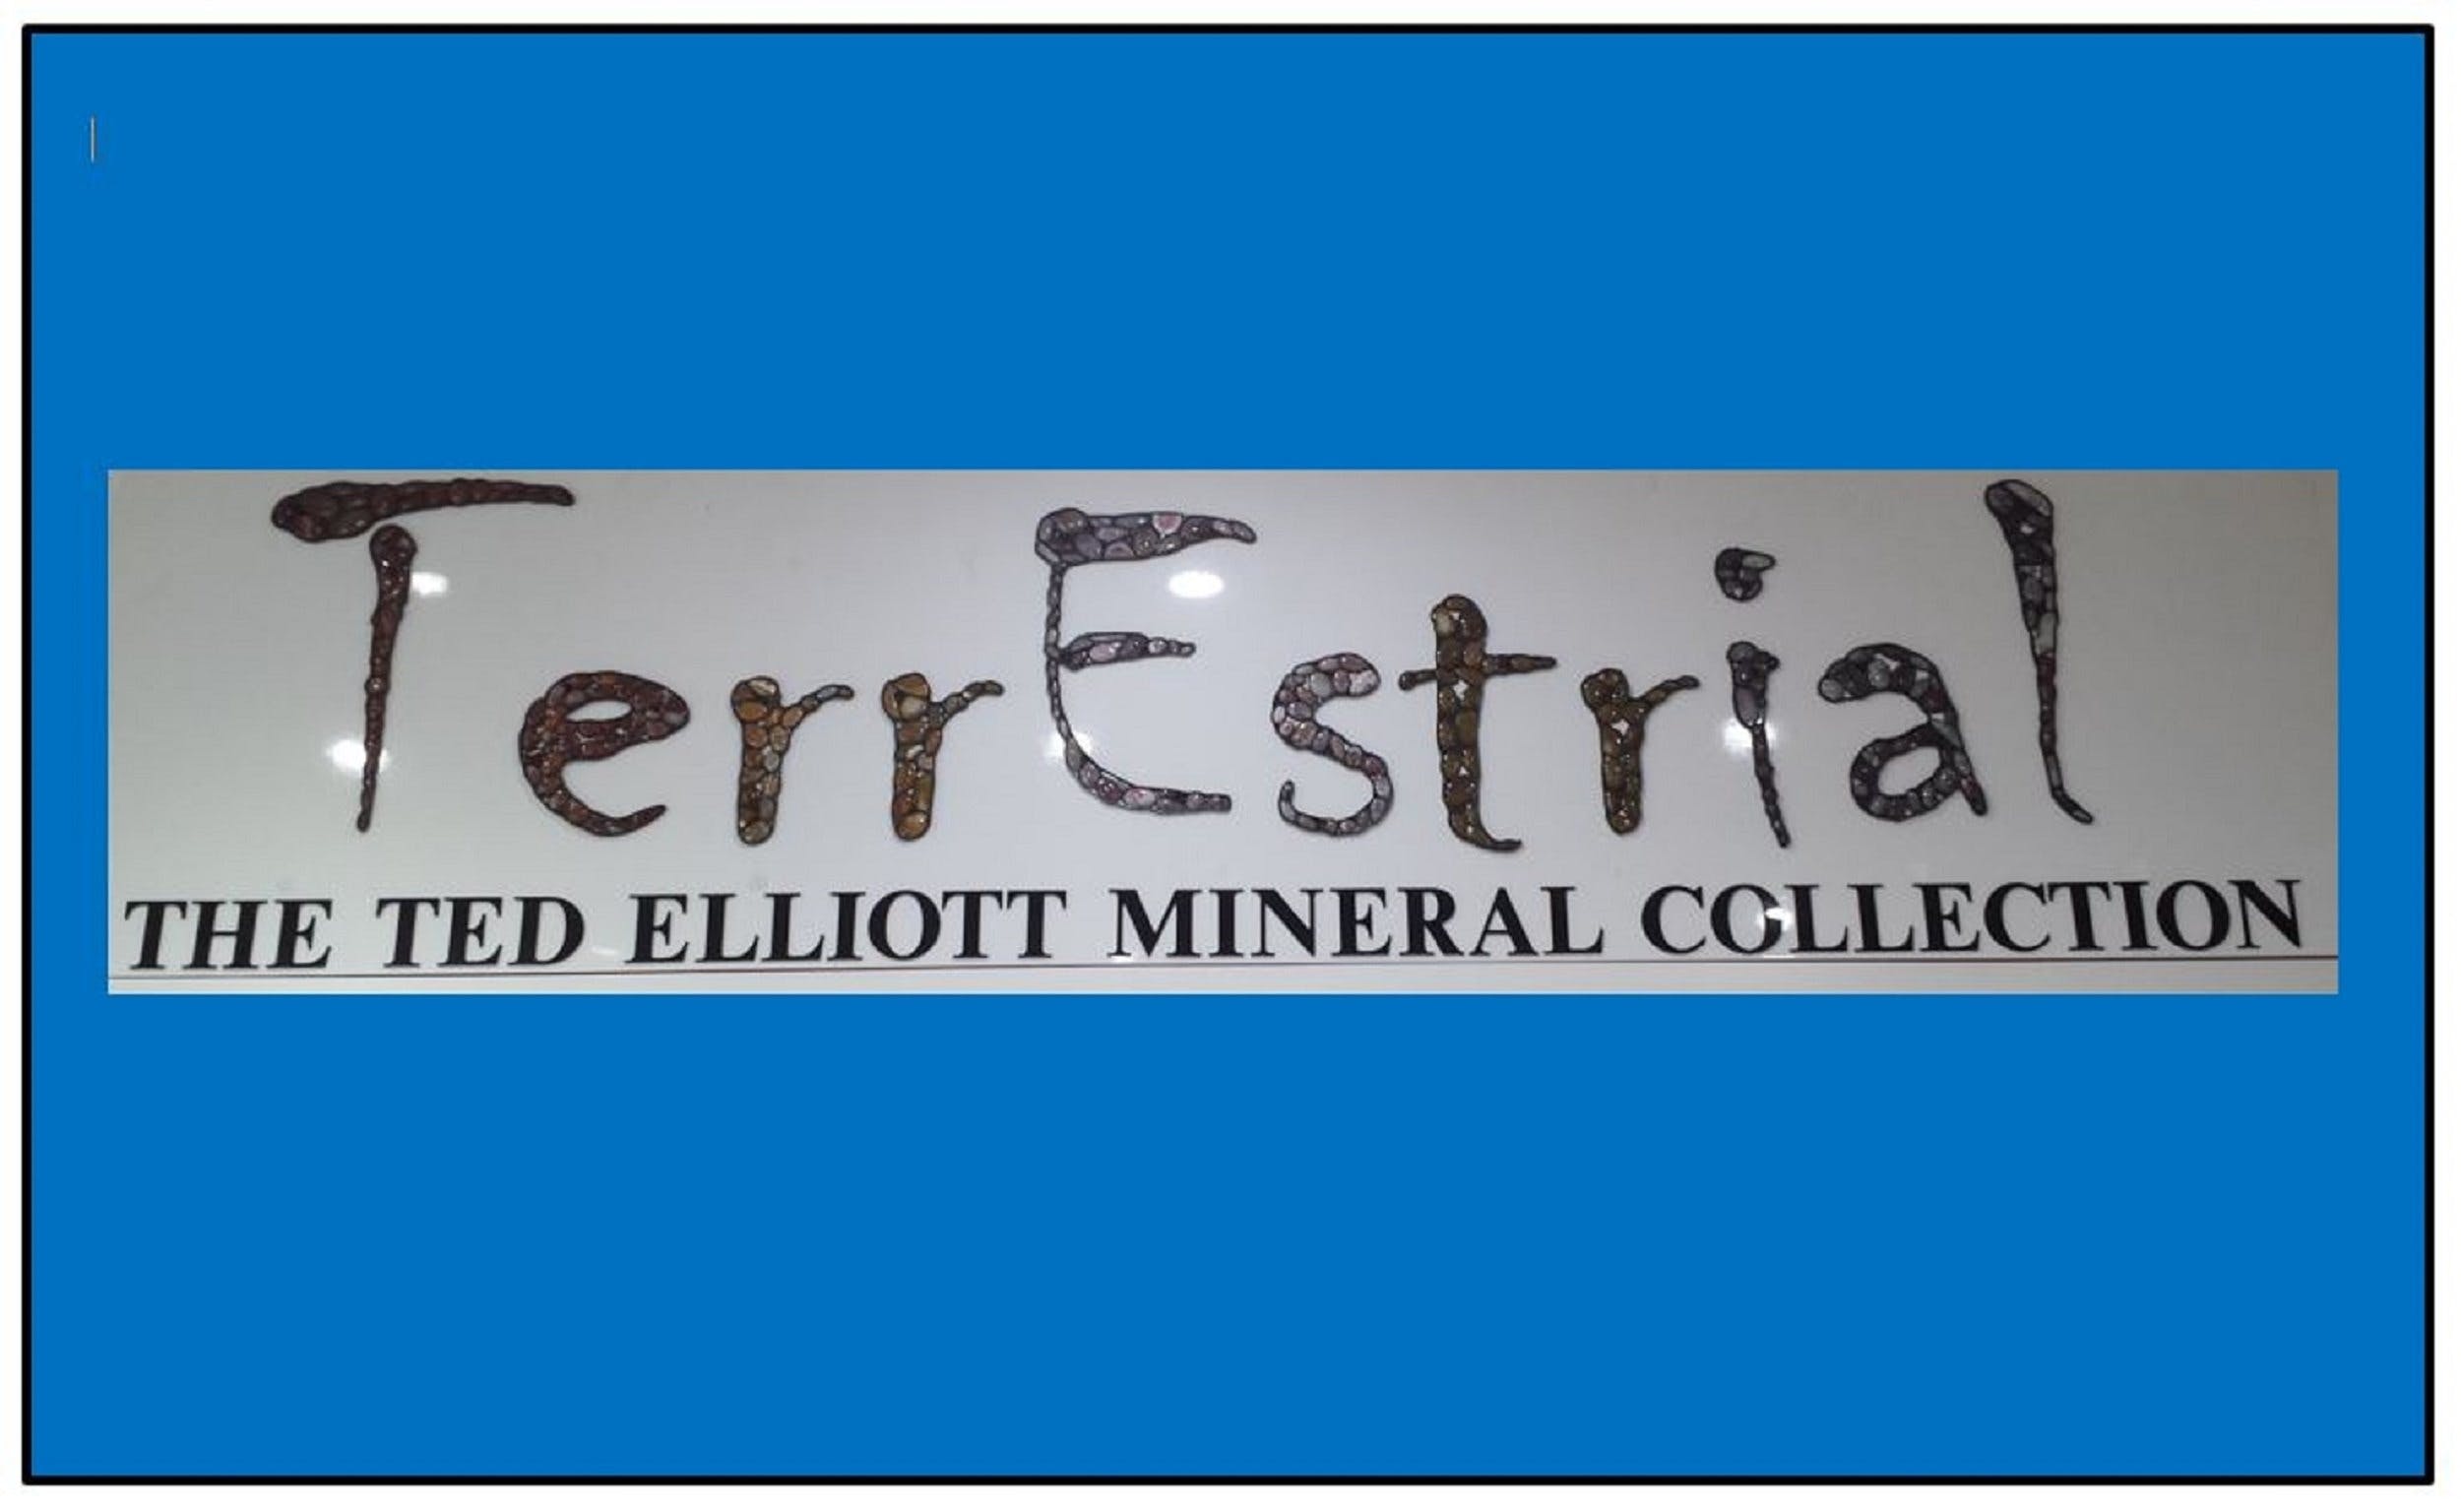 The Ted Elliott Mineral Collection - WA Accommodation